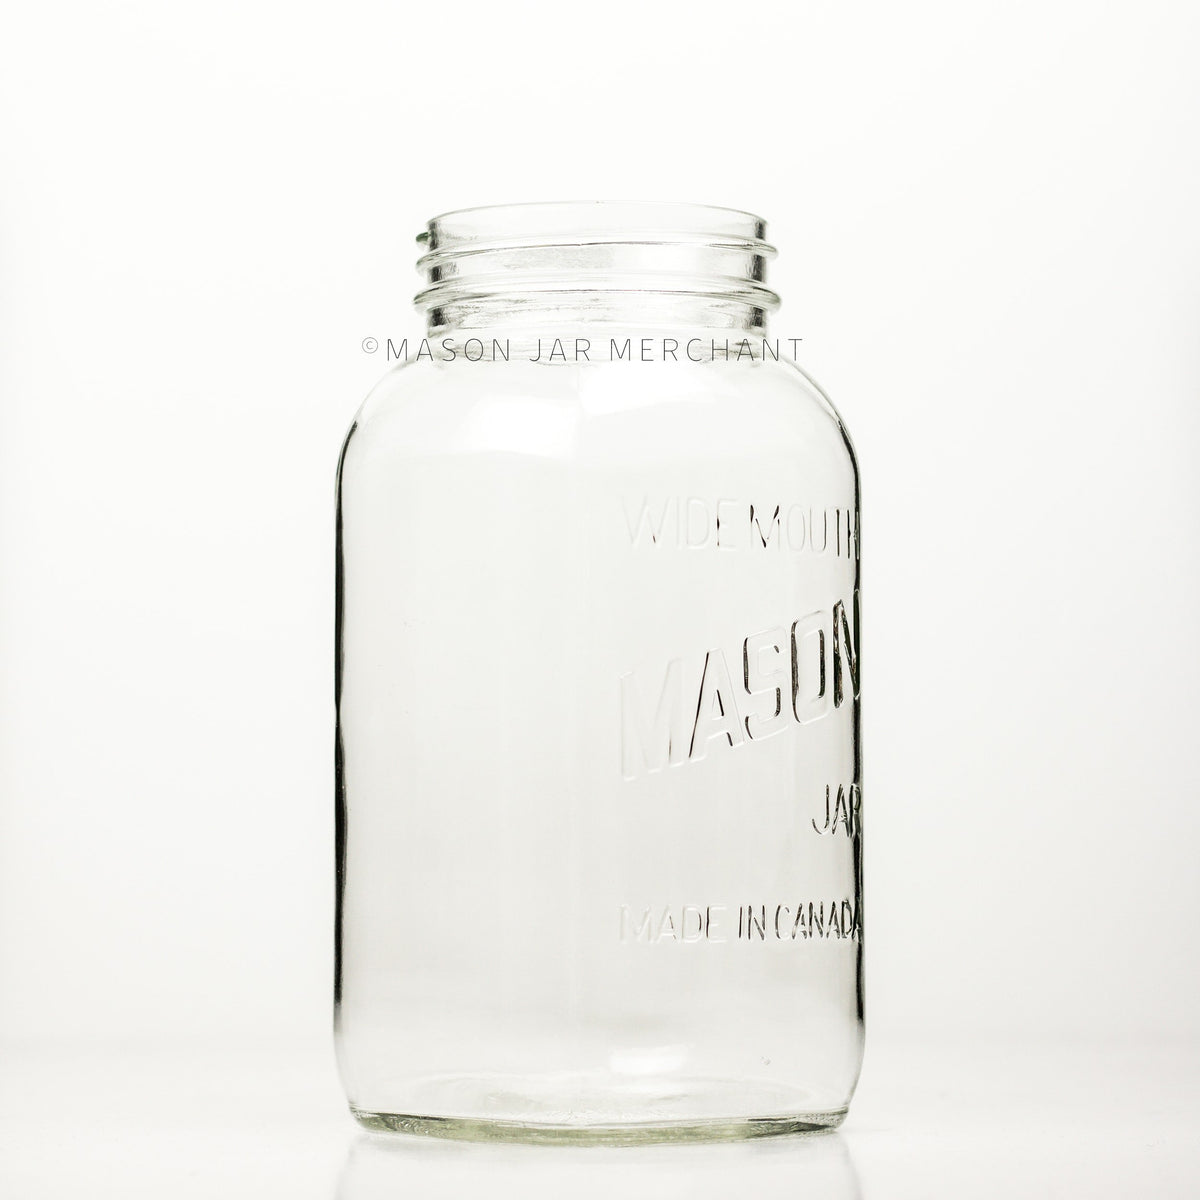 A side view of a Wide mouth half-gallon mason jar with Mason logo, against a white background